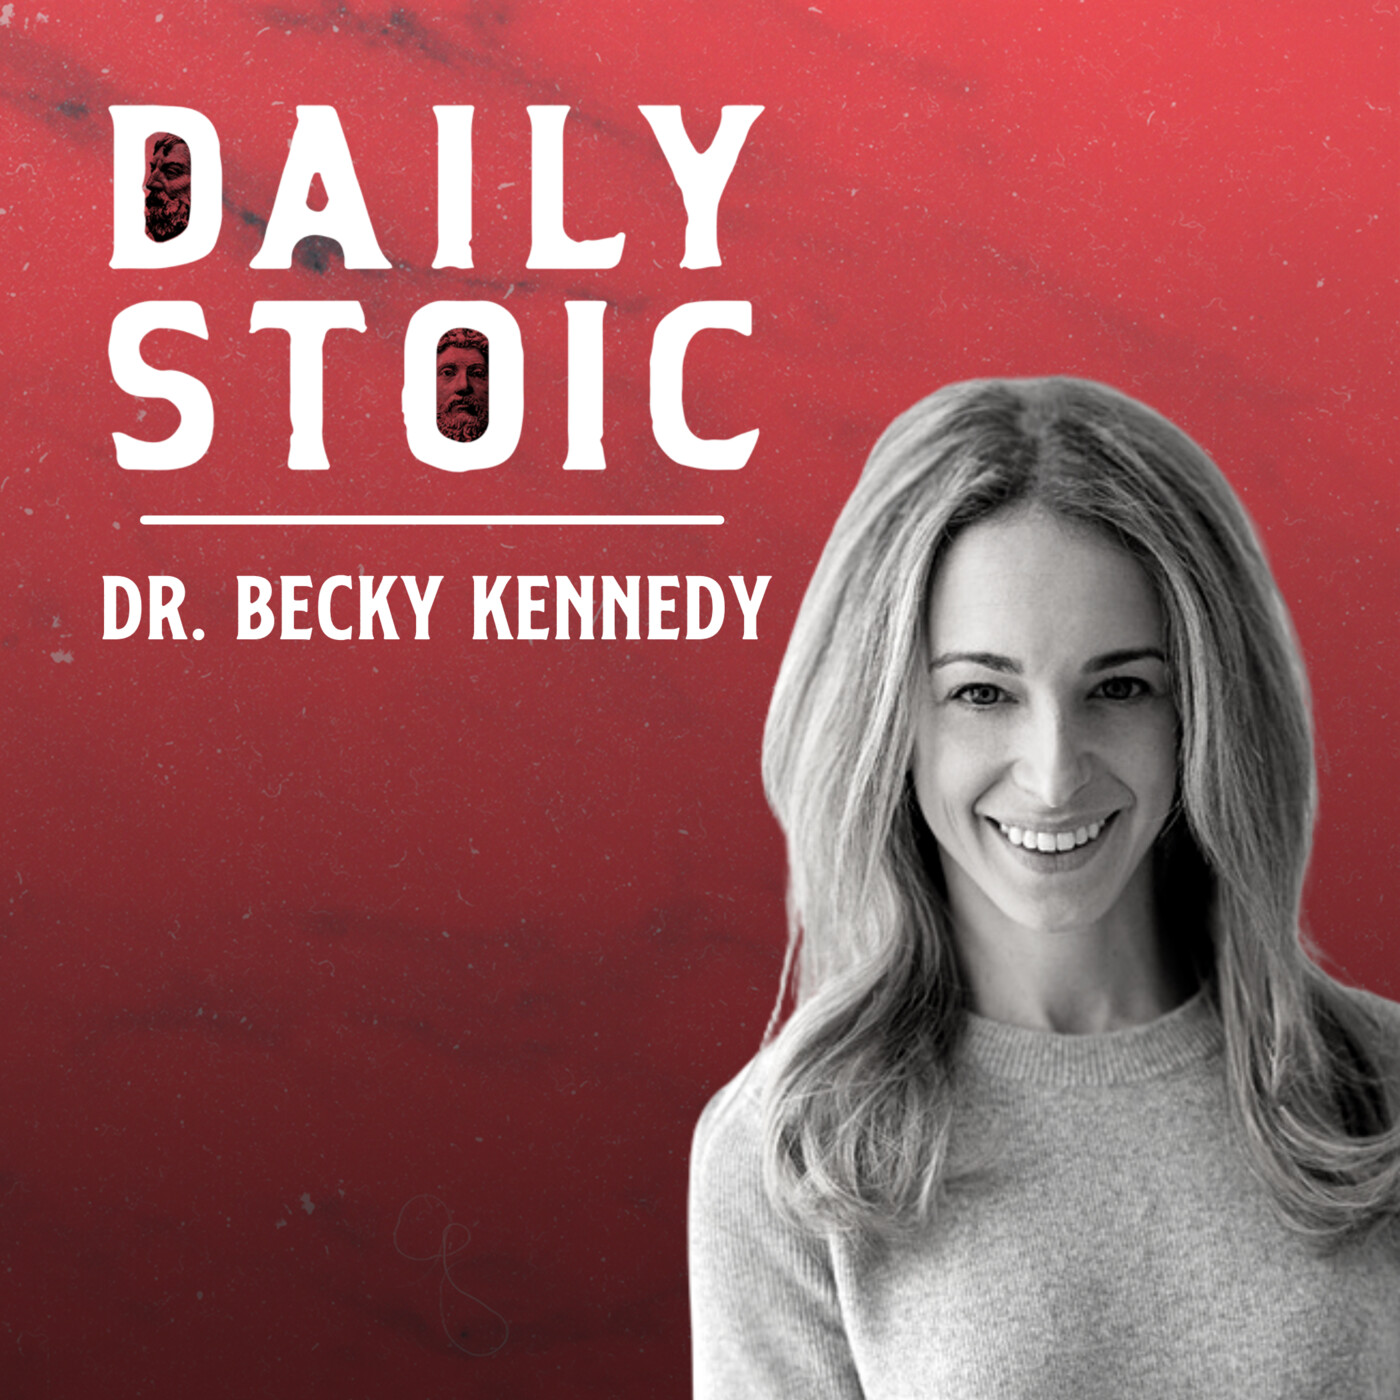 Dr. Becky Kennedy on the Stoic Art of Emotional Regulation (and Raising Great Kids)